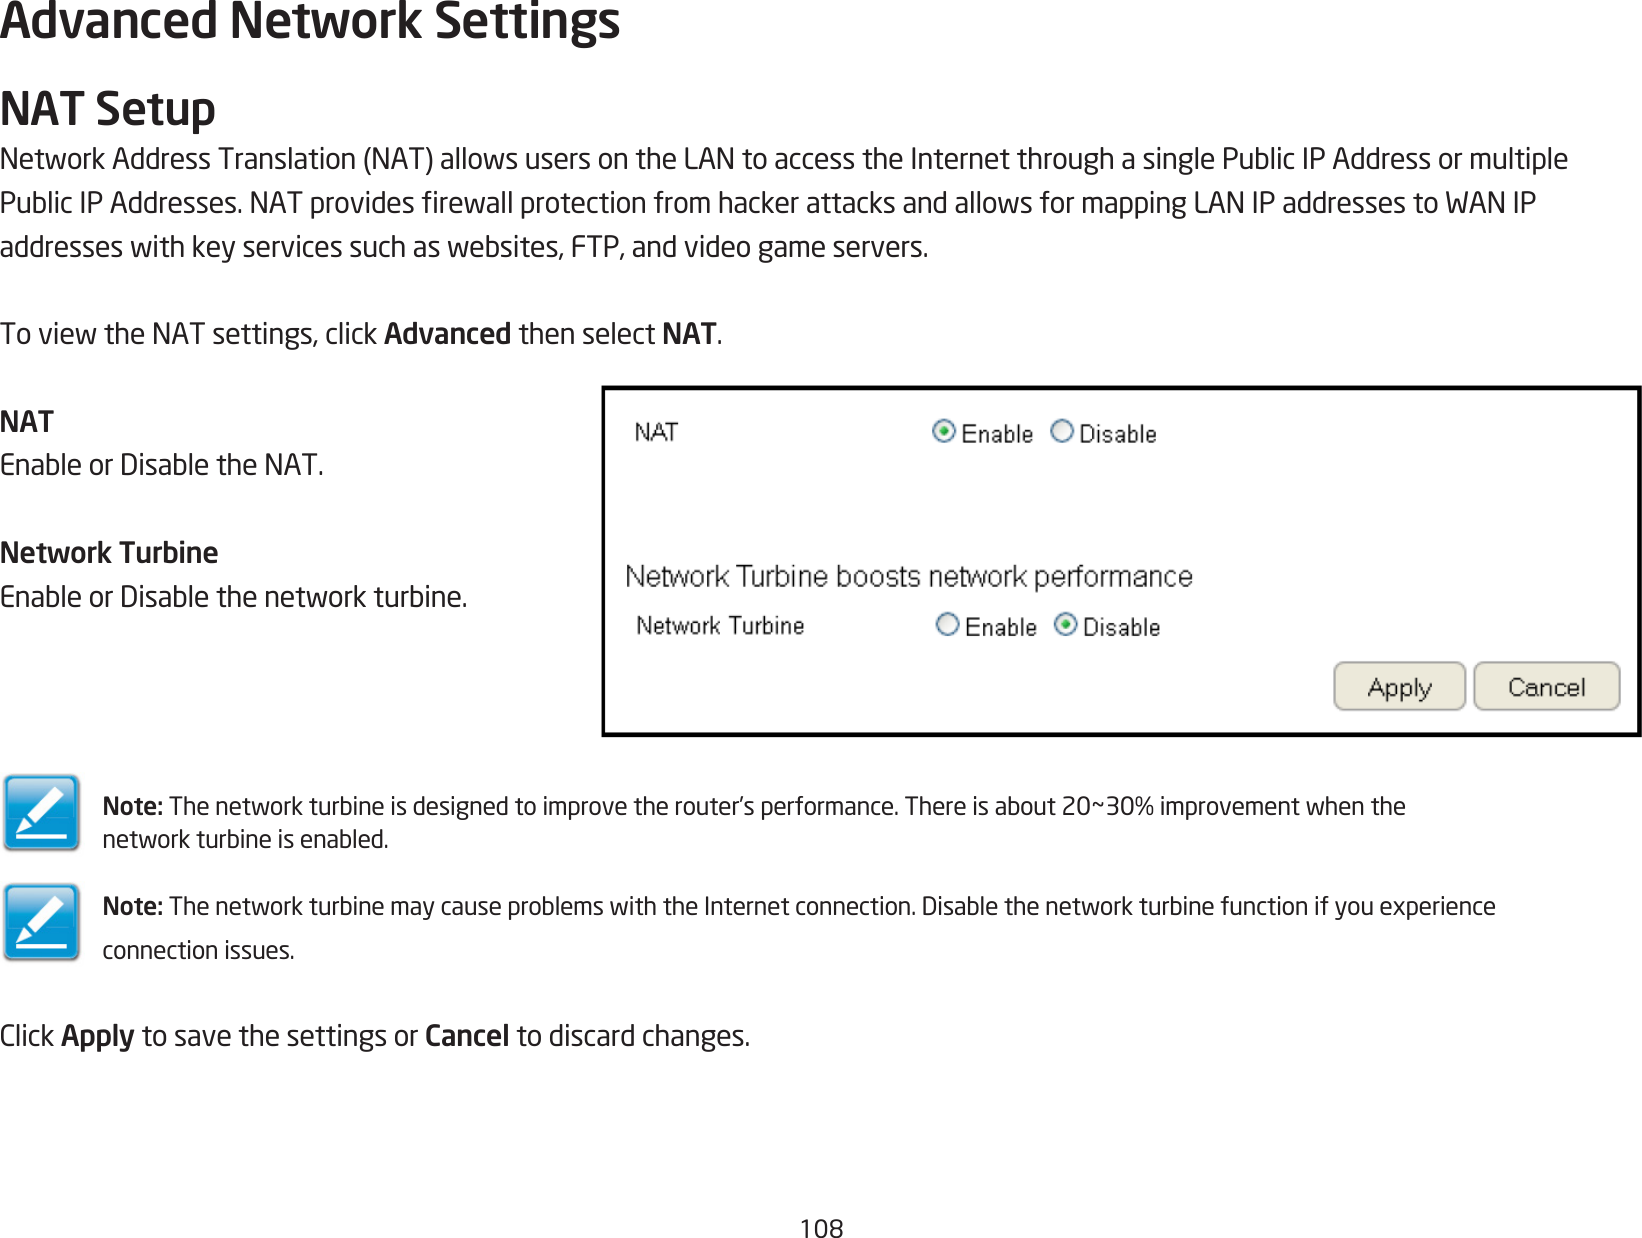 108Advanced Network SettingsNAT SetupNetworkAddressTranslation(NAT)allowsusersontheLANtoaccesstheInternetthroughasinglePublicIPAddressormultiplePublicIPAddresses.NATprovidesrewallprotectionfromhackerattacksandallowsformappingLANIPaddressestoWANIPaddresseswithkeyservicessuchaswebsites,FTP,andvideogameservers.ToviewtheNATsettings,clickAdvanced then select NAT.NATEnableorDisabletheNAT.Network TurbineEnableorDisablethenetworkturbine.Note: Thenetworkturbineisdesignedtoimprovetherouter’sperformance.Thereisabout20~30%improvementwhenthenetworkturbineisenabled.Note: ThenetworkturbinemaycauseproblemswiththeInternetconnection.Disablethenetworkturbinefunctionifyouexperienceconnection issues.ClickApply to save the settings or Cancel to discard changes.